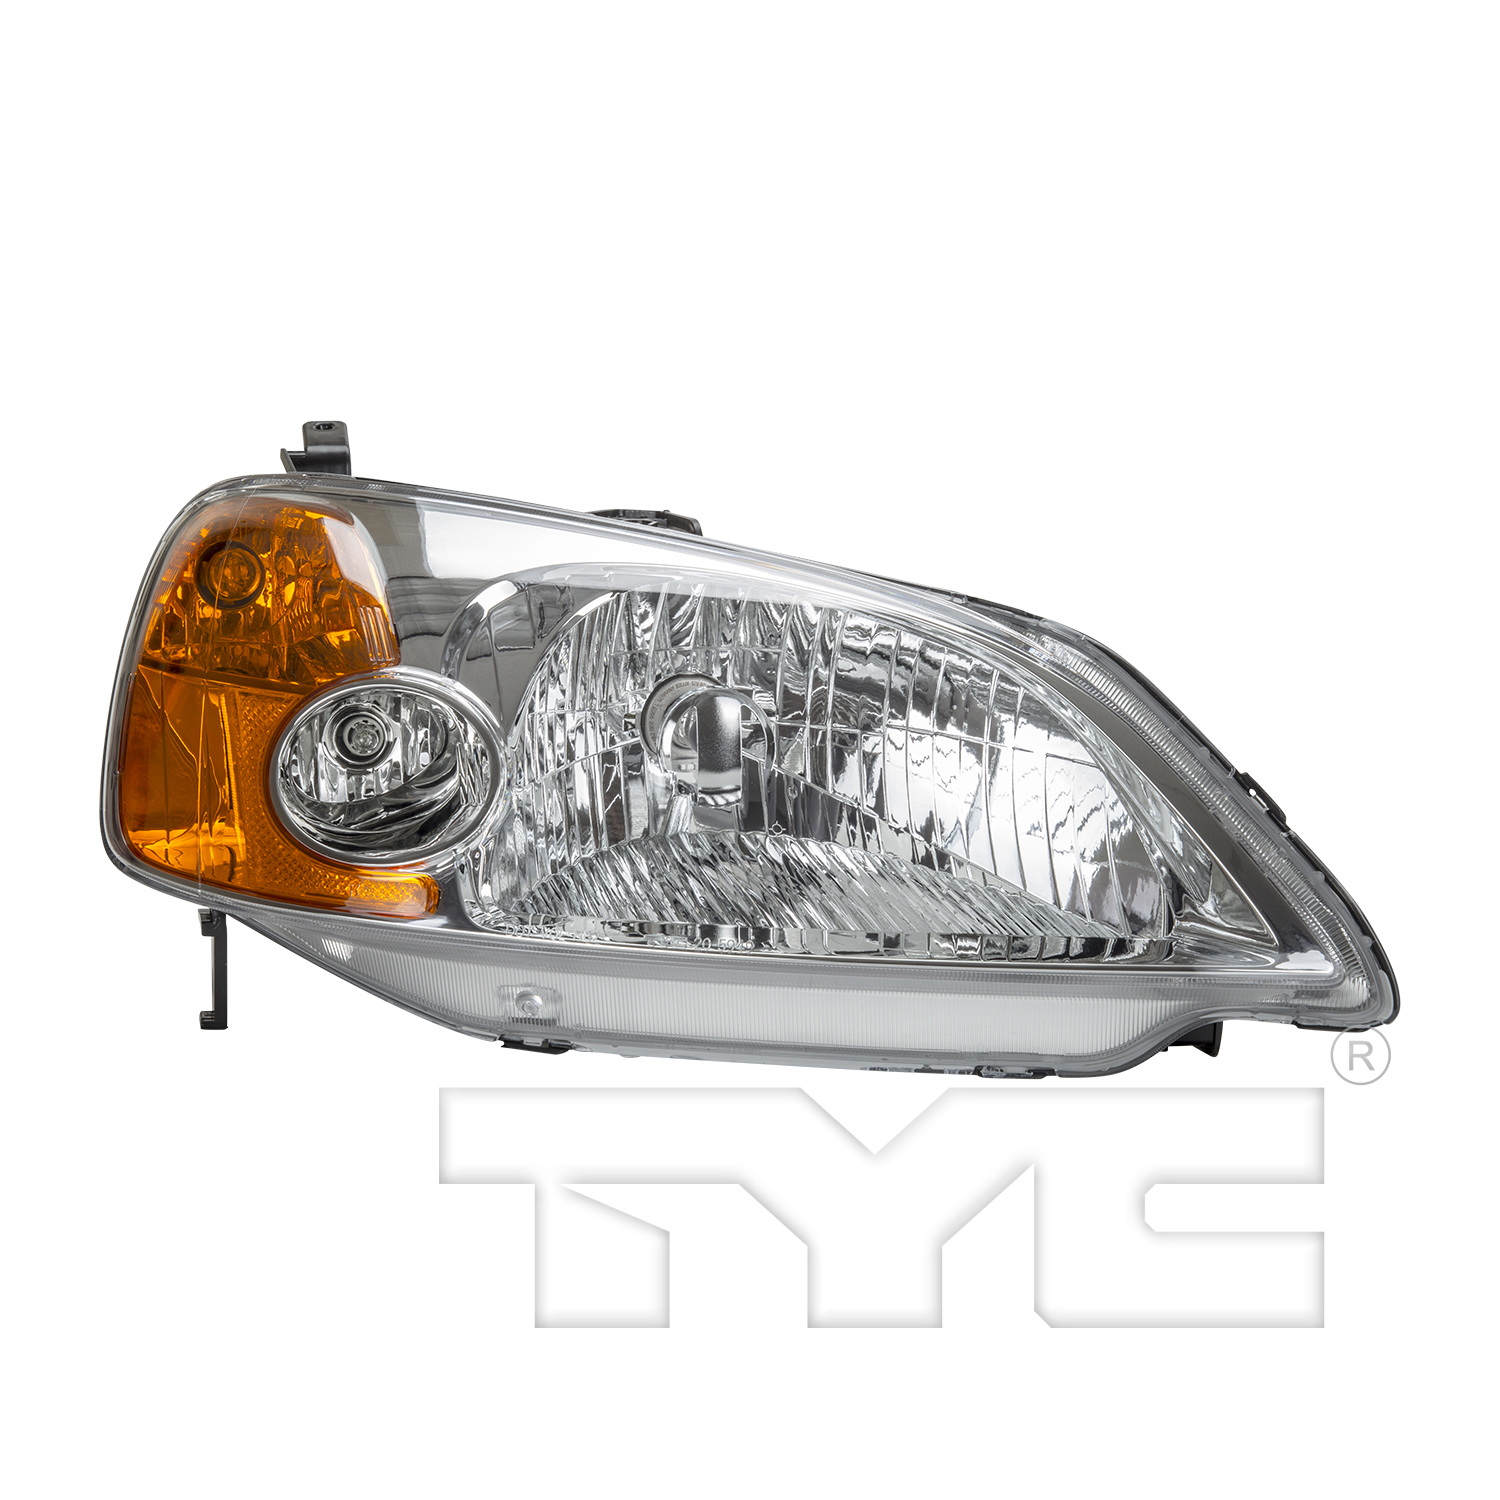 Aftermarket HEADLIGHTS for HONDA - CIVIC, CIVIC,03-03,RT Headlamp assy composite